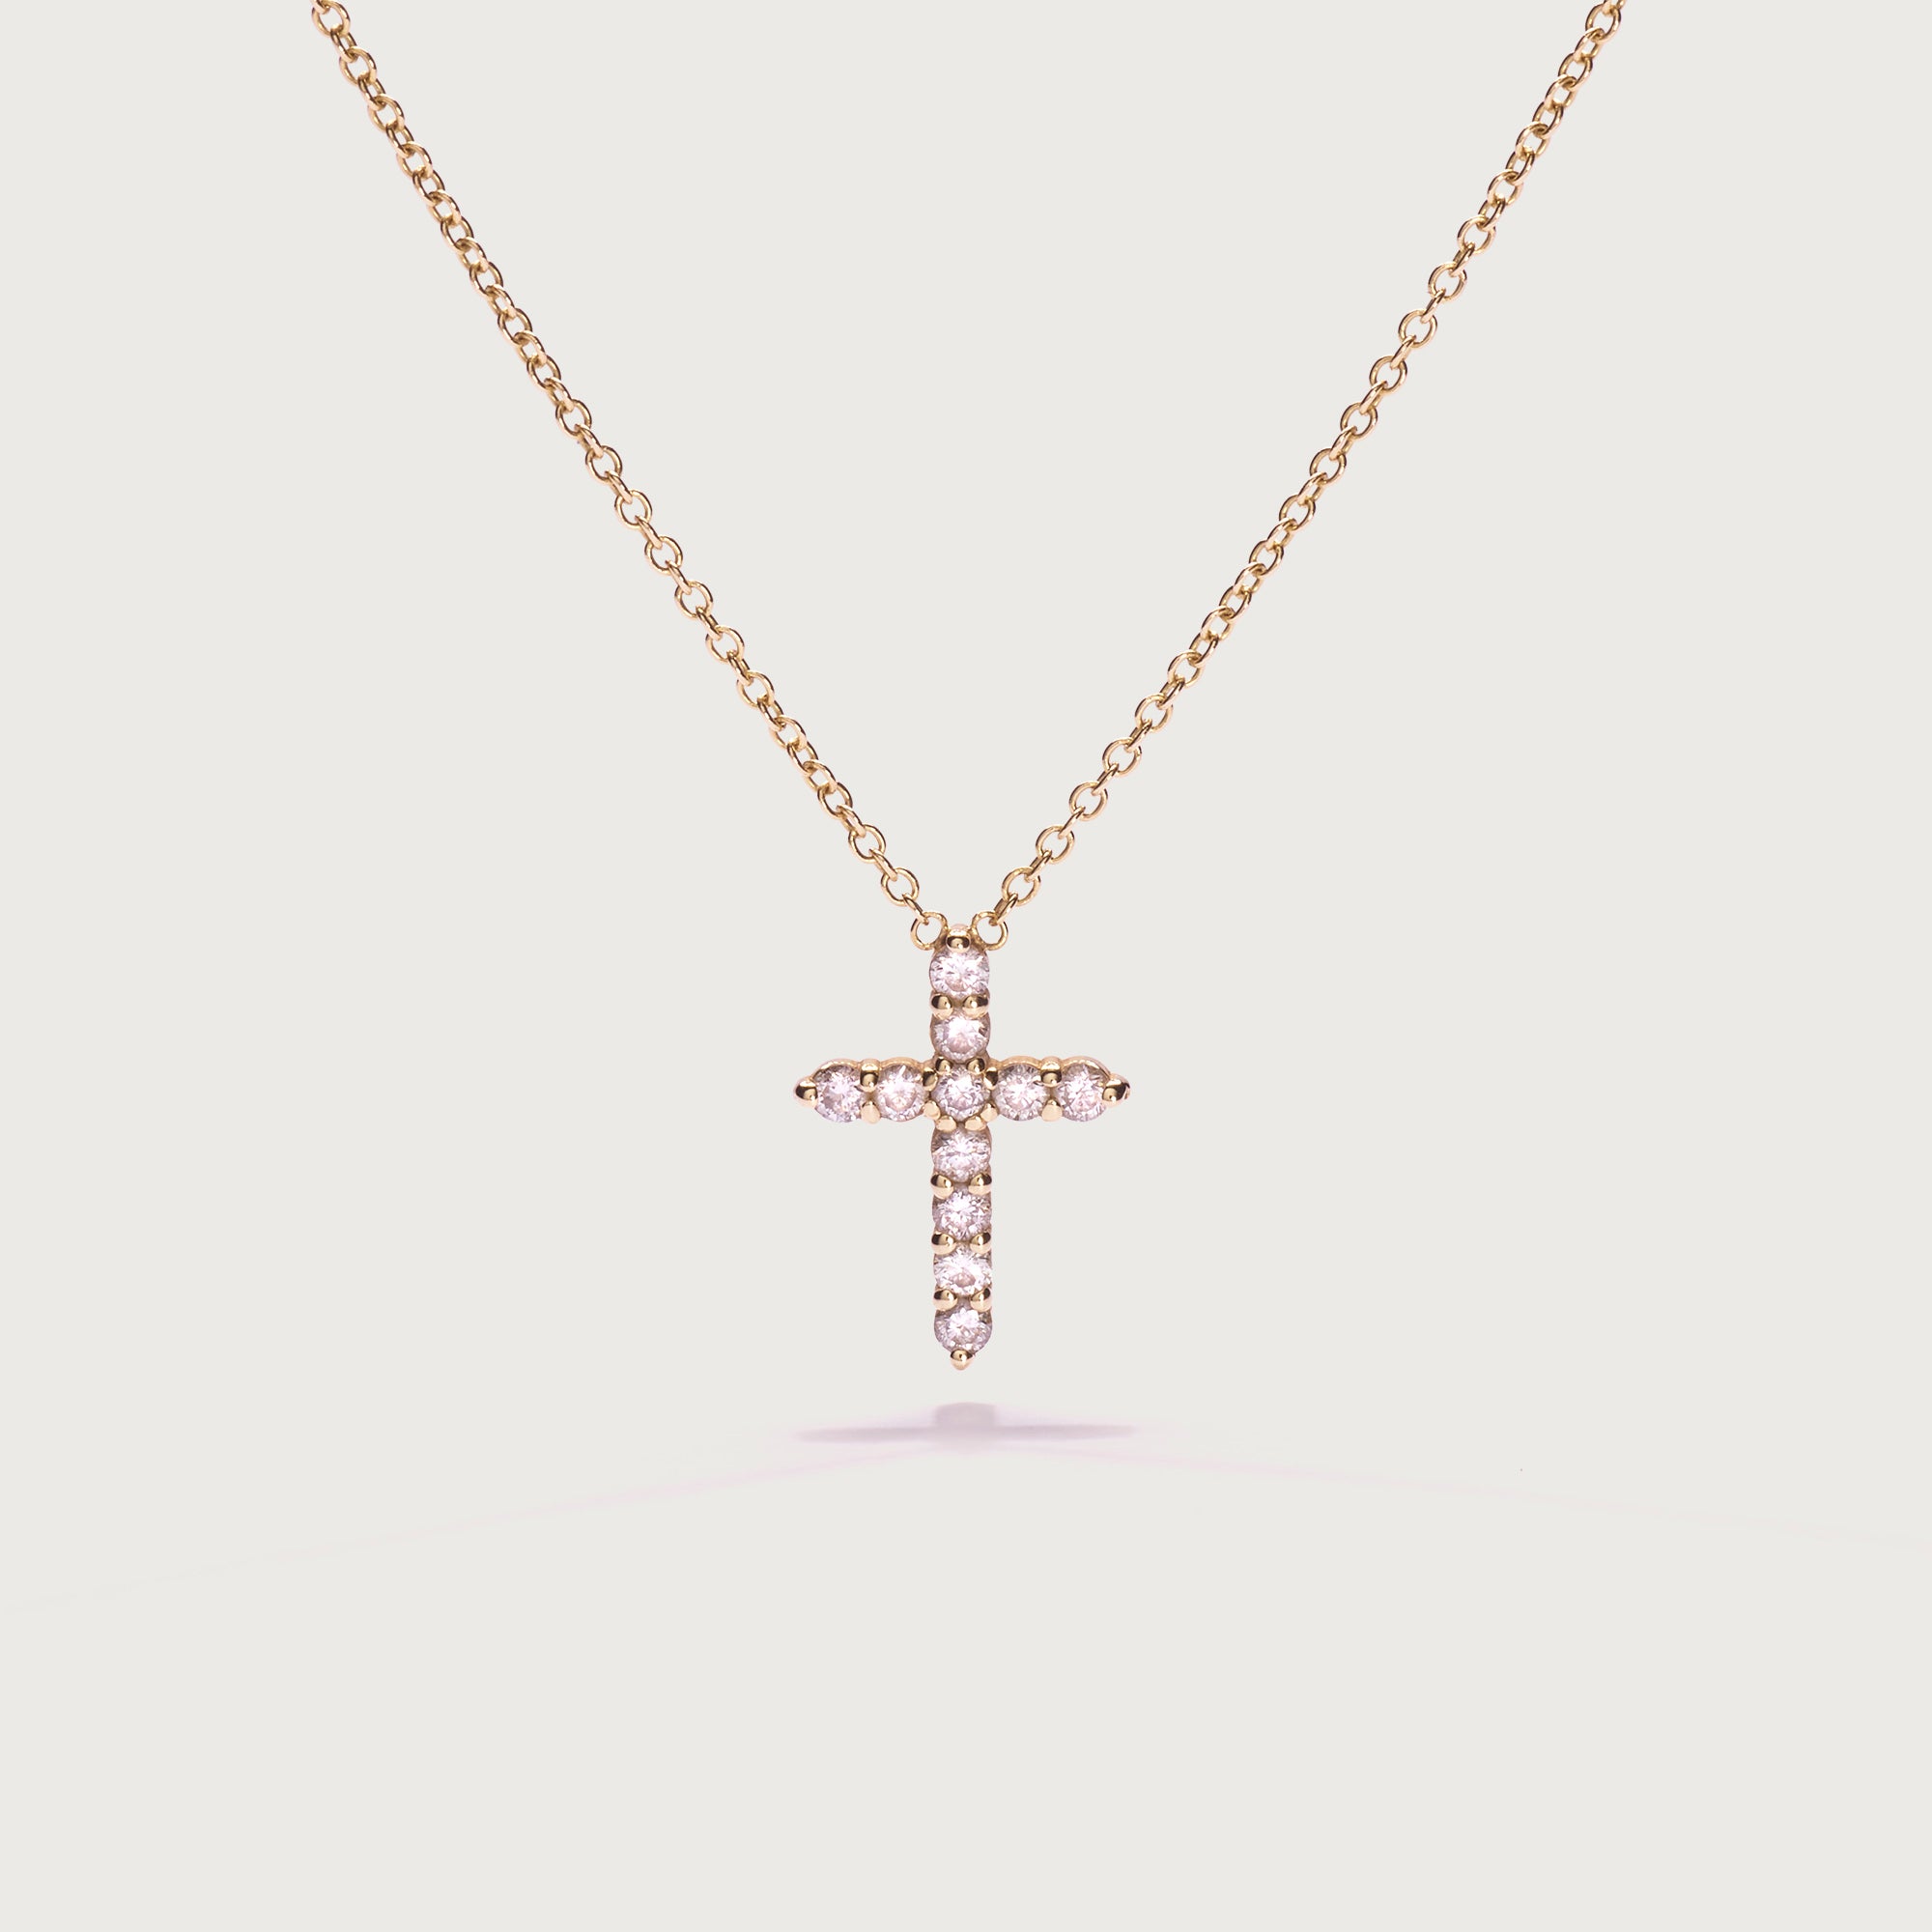 DARYL-ANN CROSS NECKLACE – ERICA WOOLSTON | OFFICIAL SITE